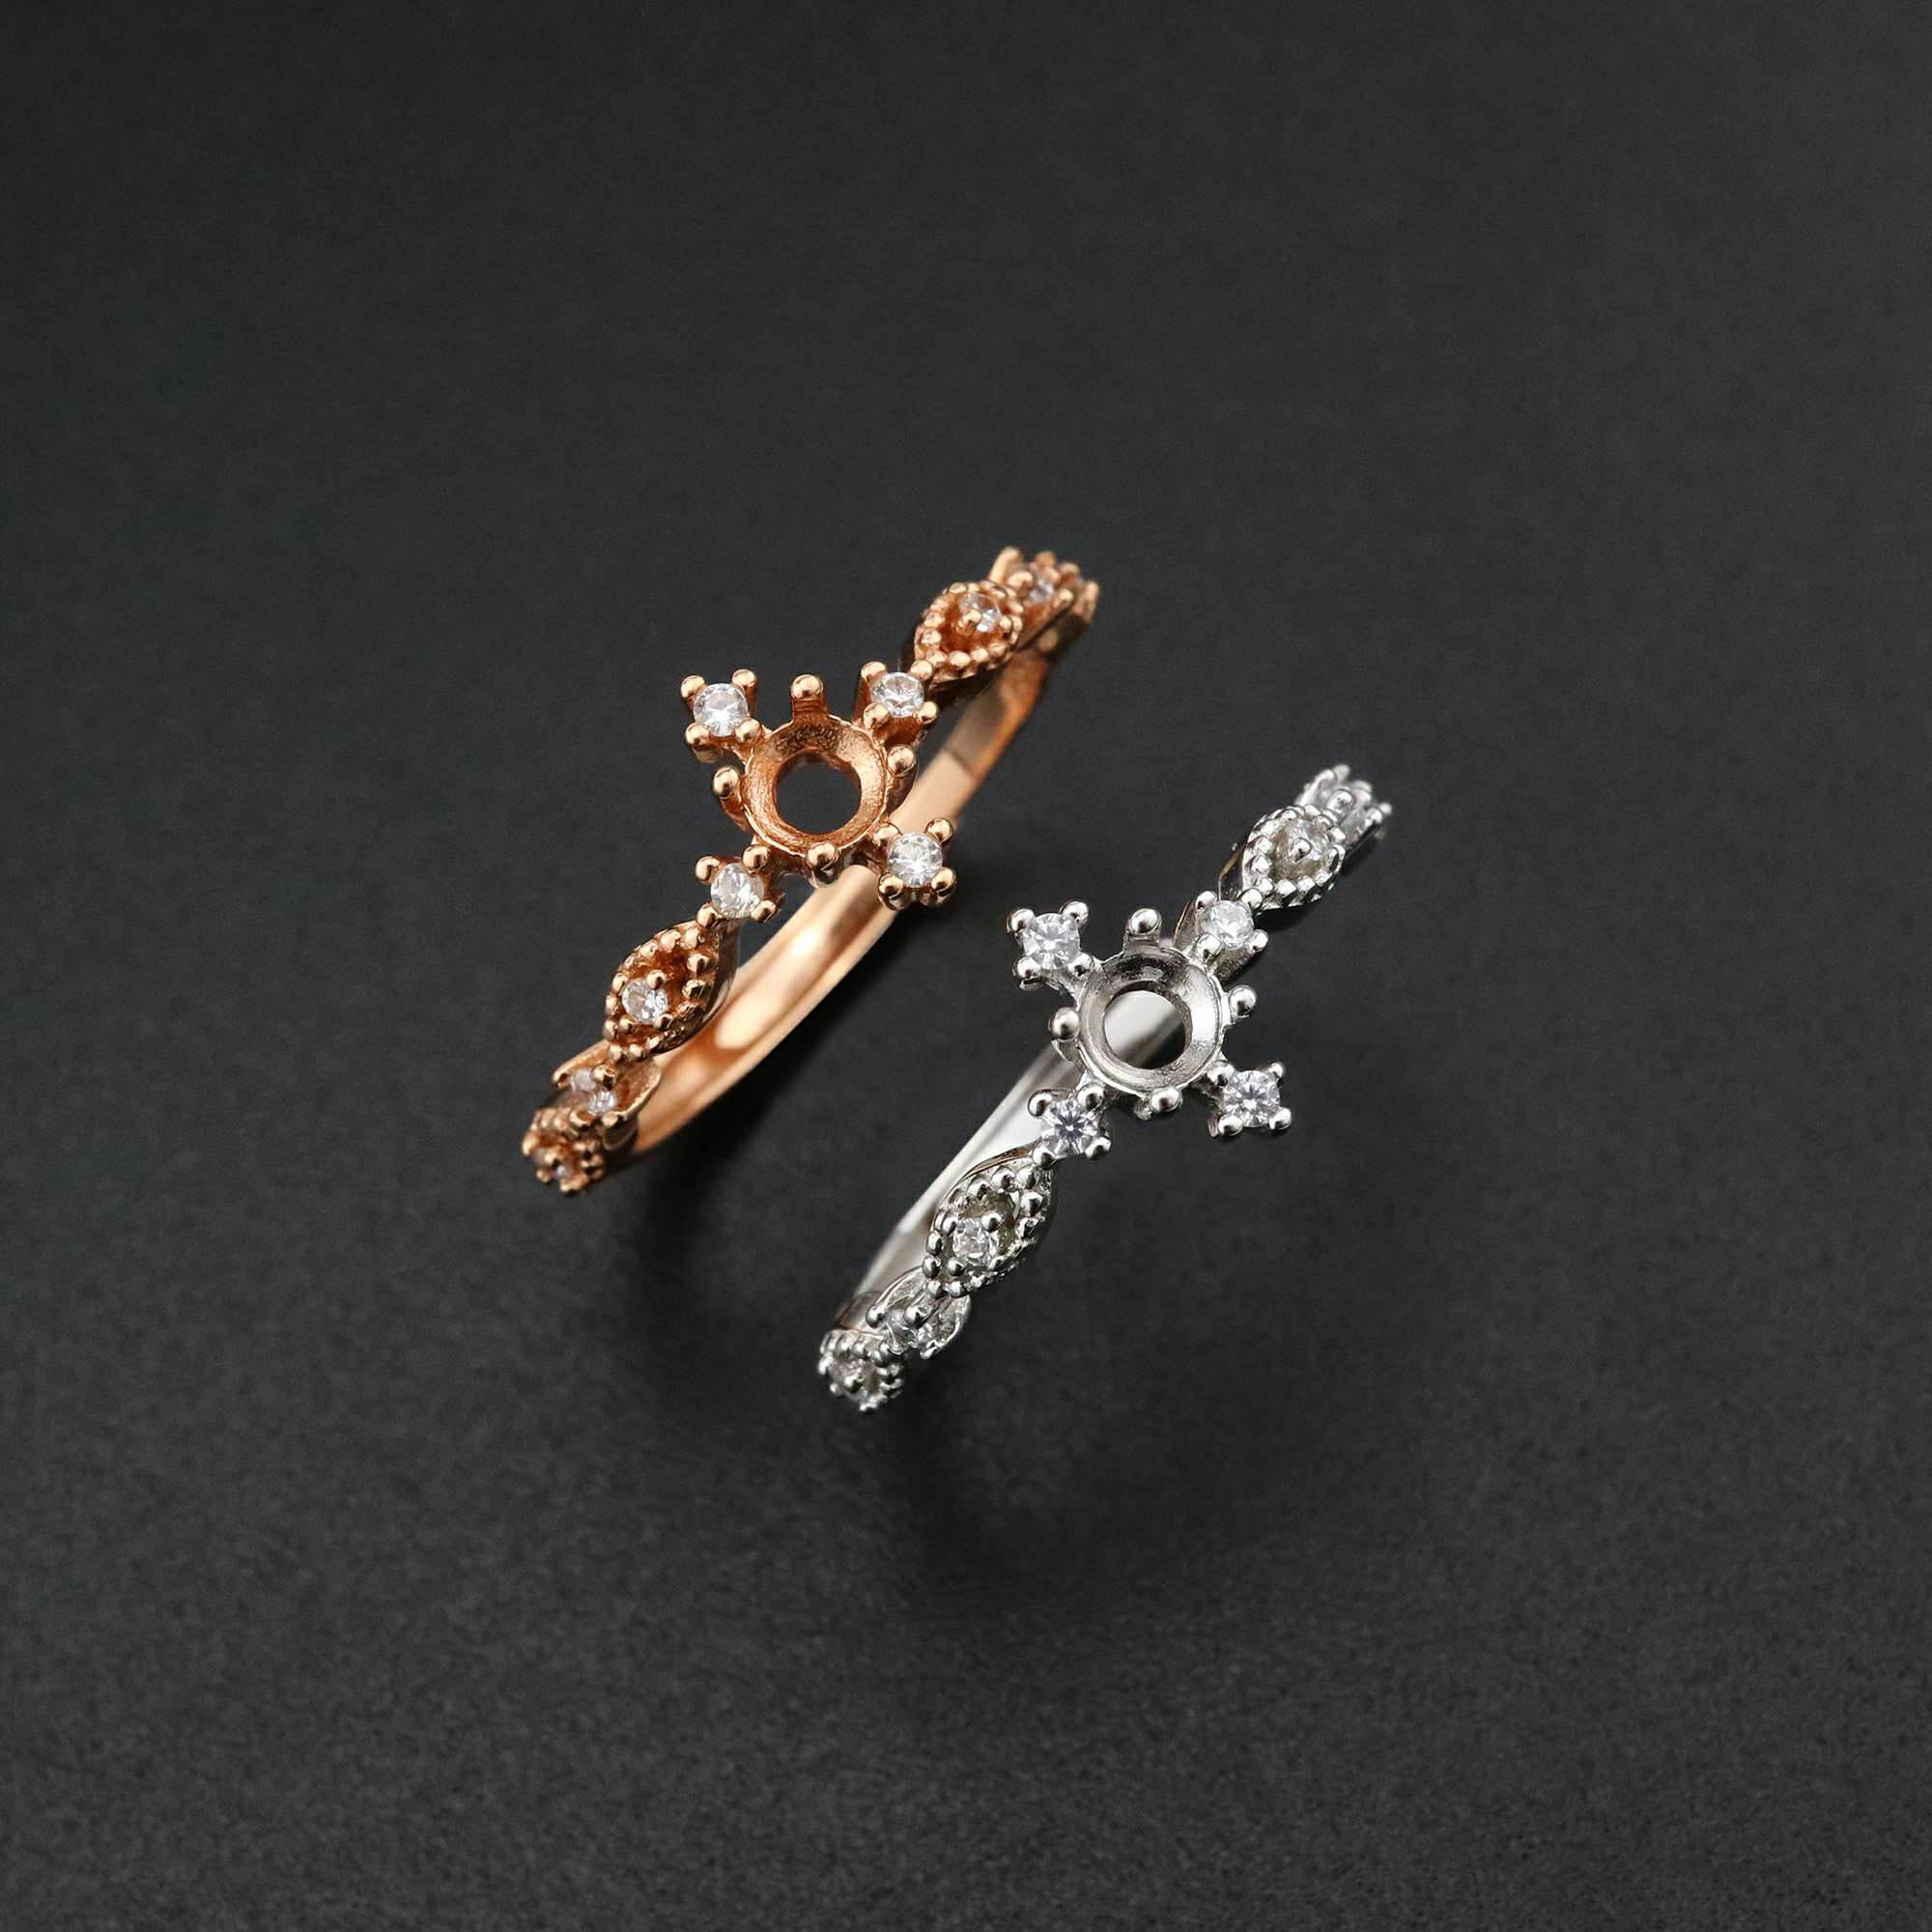 1Pcs 4MM Round Vintage Style Rose Gold Plated Solid 925 Sterling Silver DIY Adjustable Prong Ring Settings Blank for Gemstone 1210058 - Click Image to Close